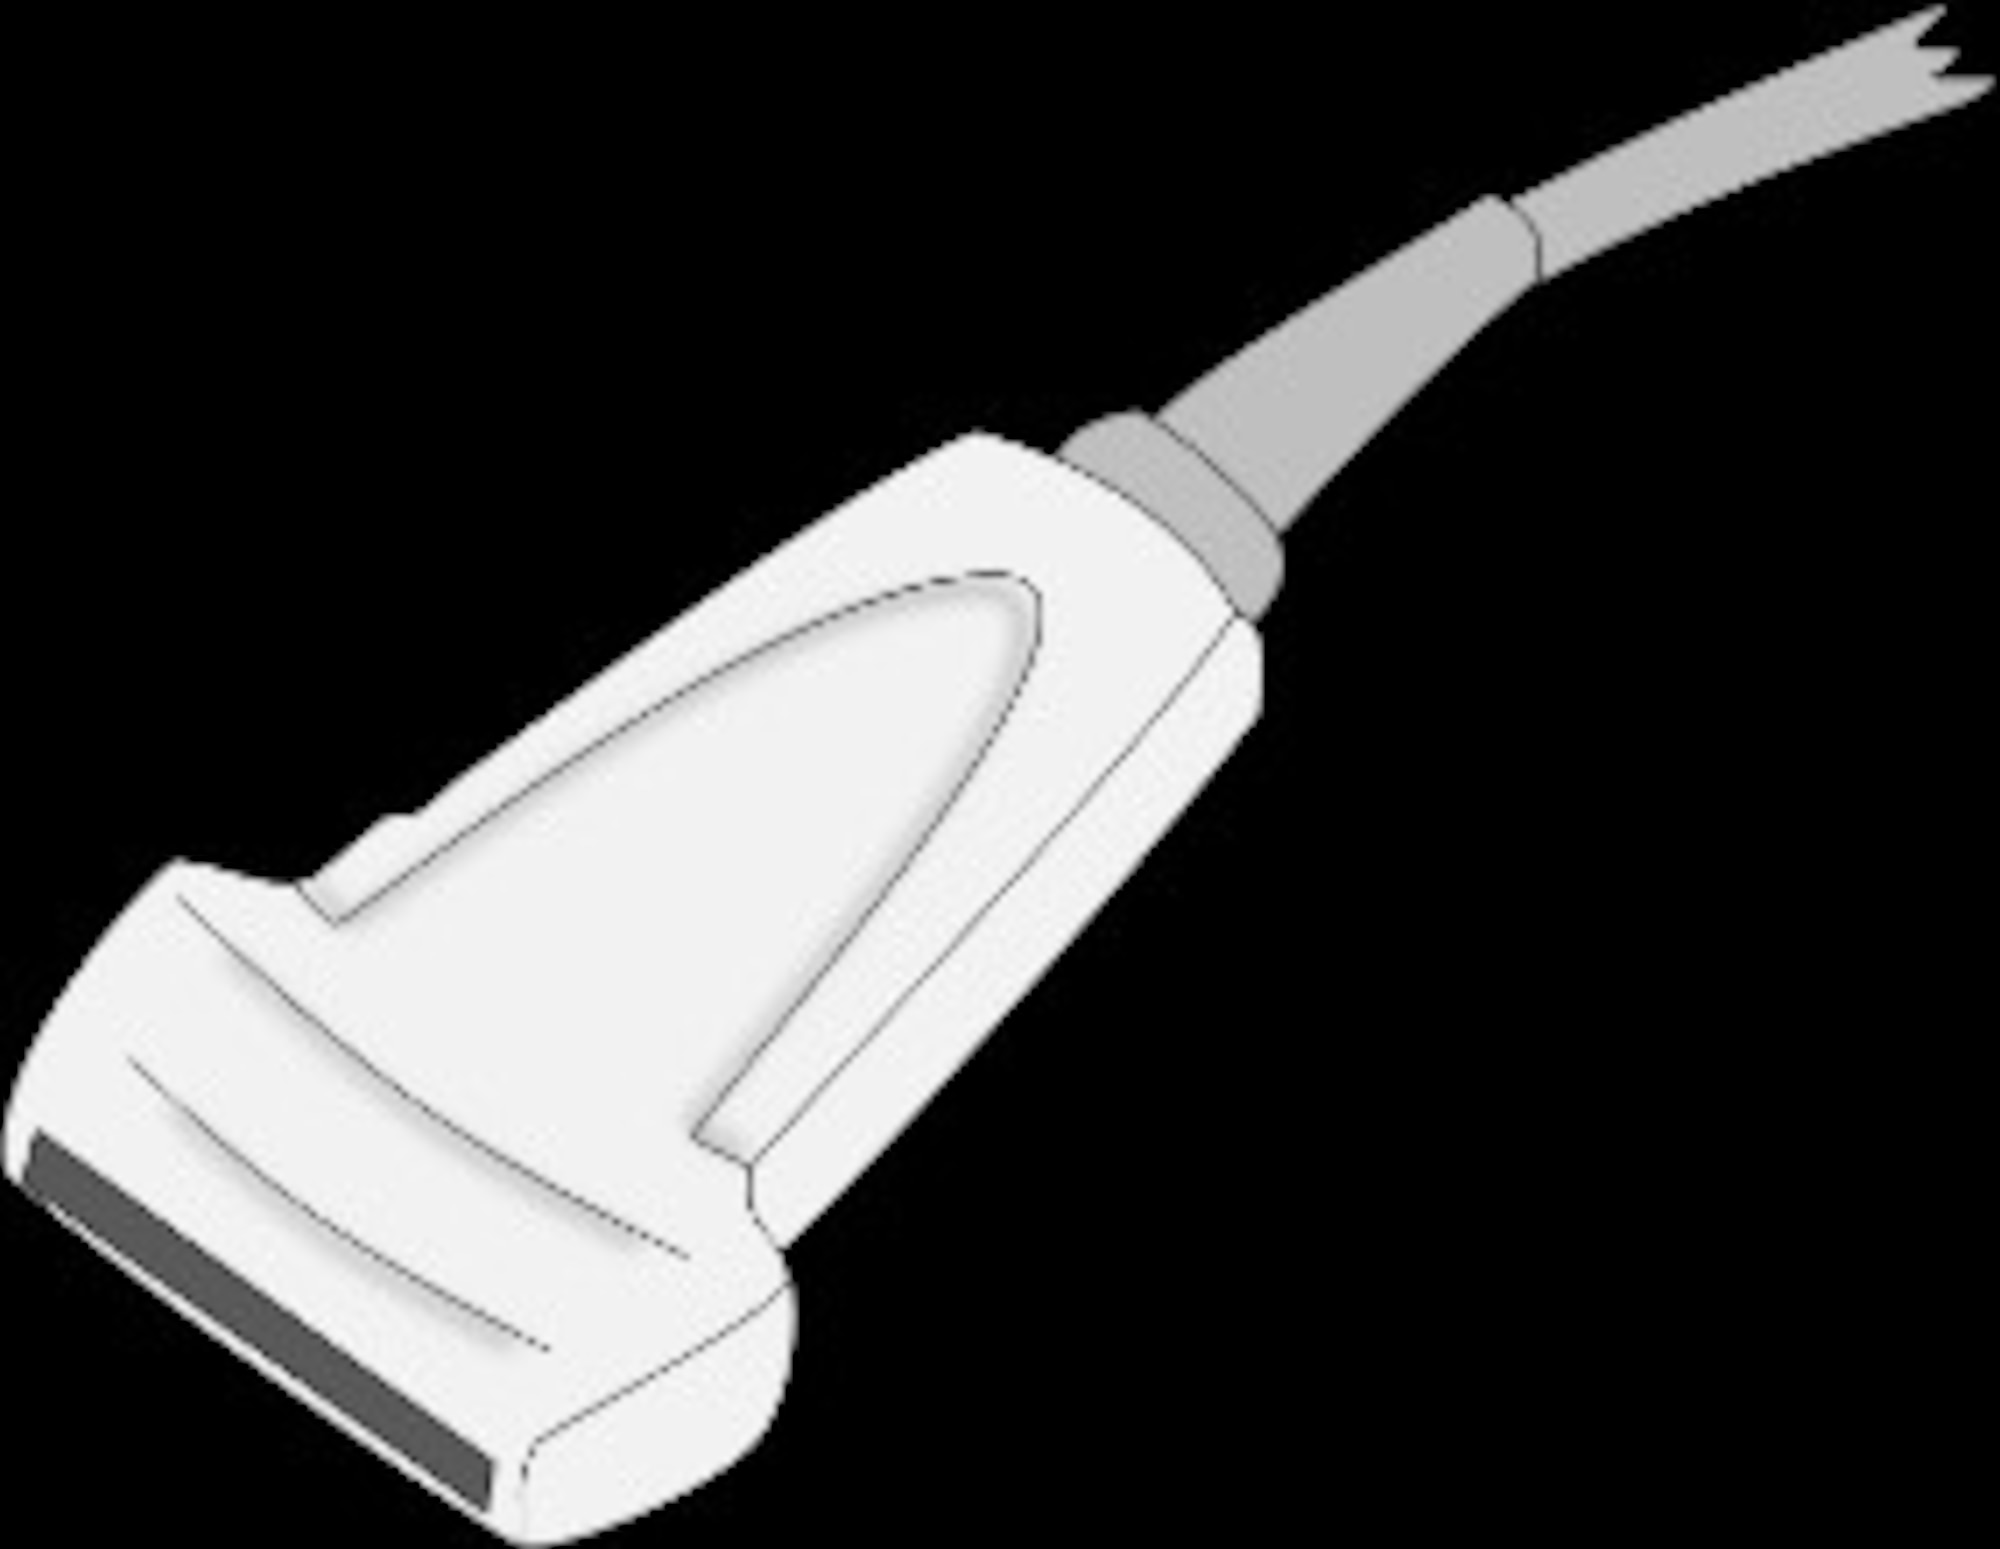 Conventional ultrasound hand-held rigid array of transducers. (Courtesy graphic)